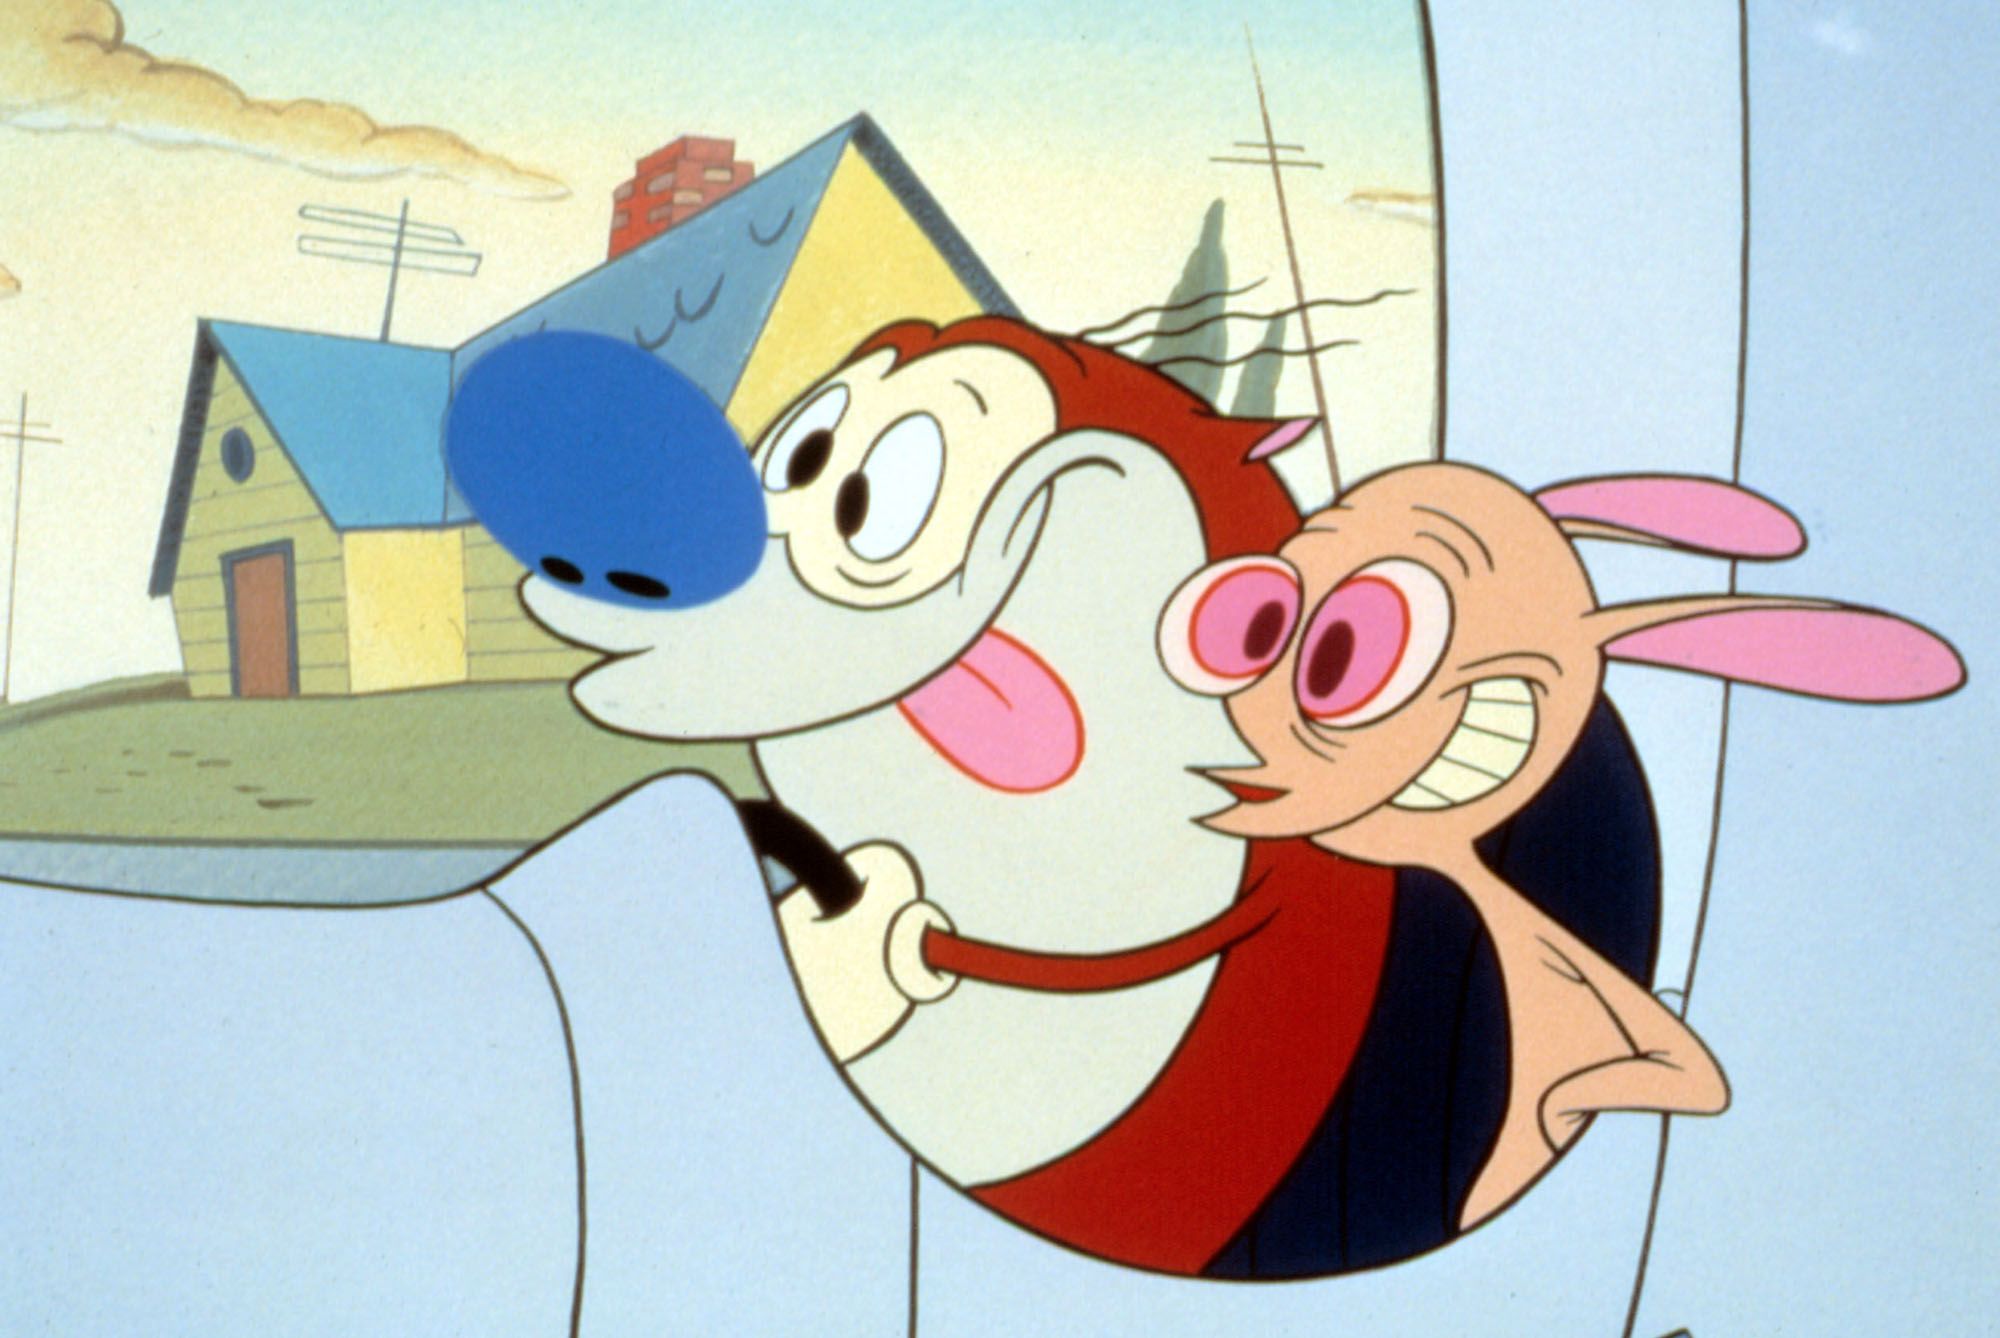 ‘Ren & Stimpy’ Is Coming Back After Being Revived By Comedy Central